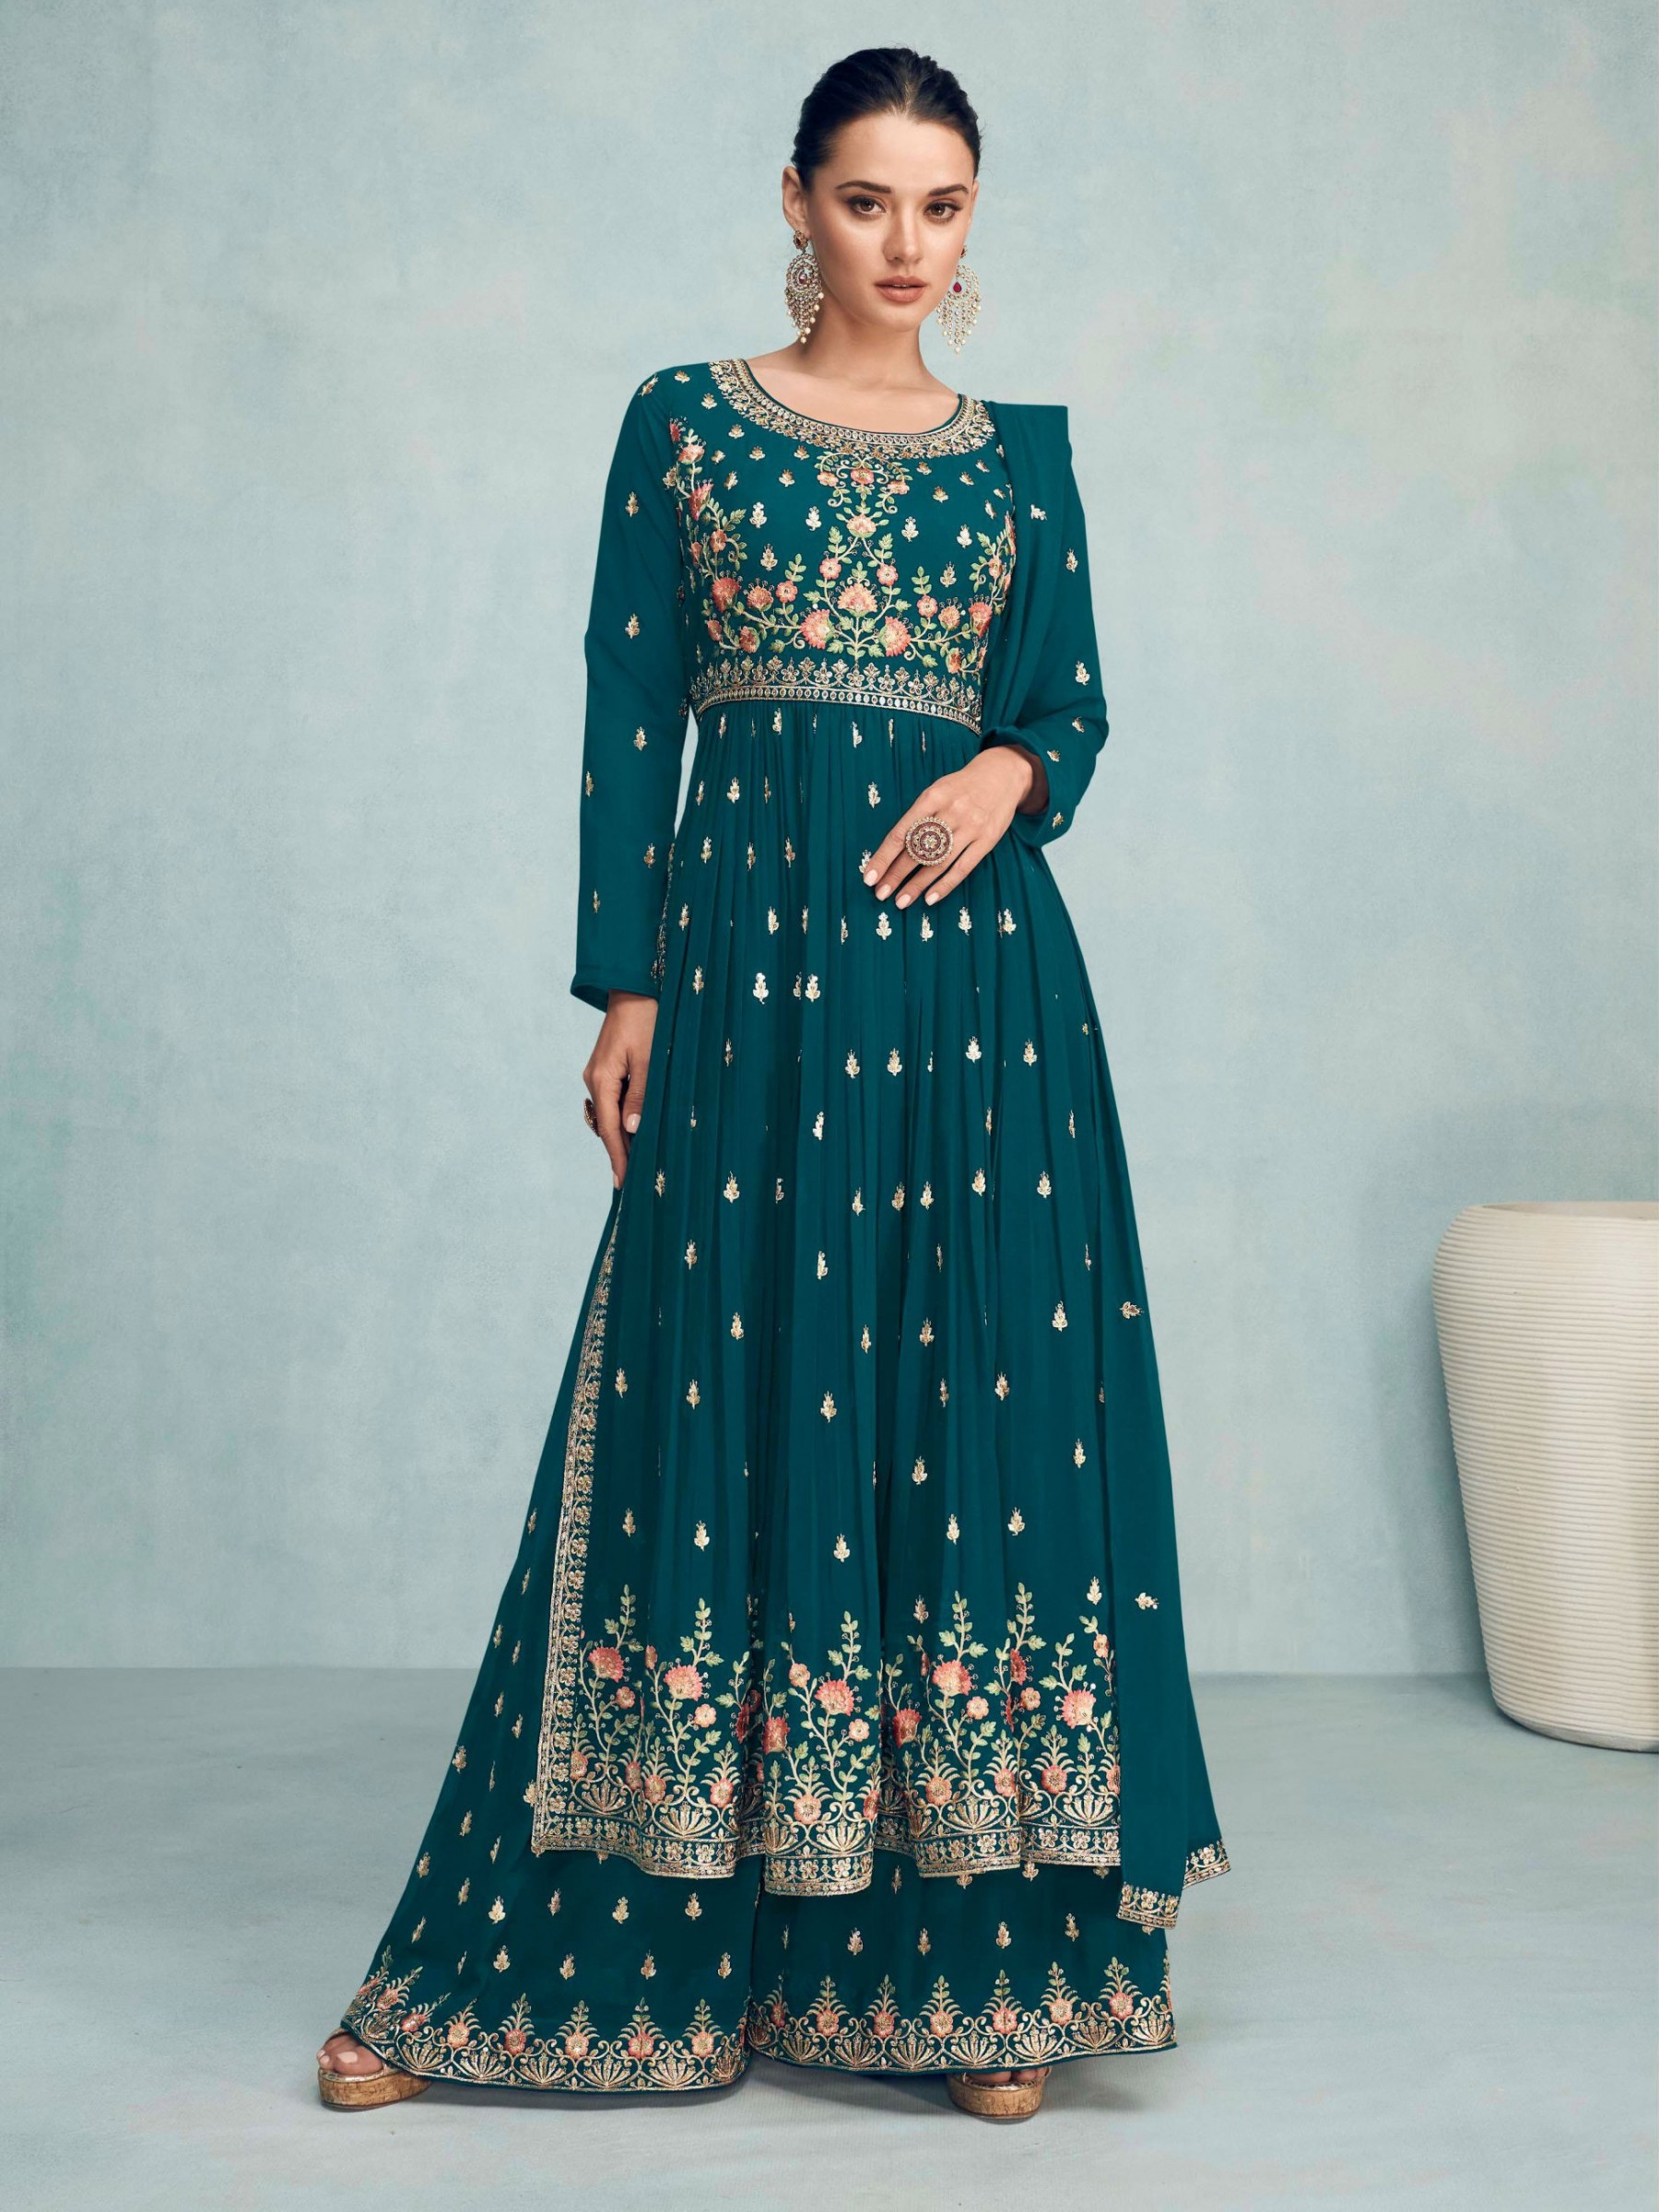 Pure Georgette  Party Wear Plazo  in Teal Blue Color with  Embroidery Work